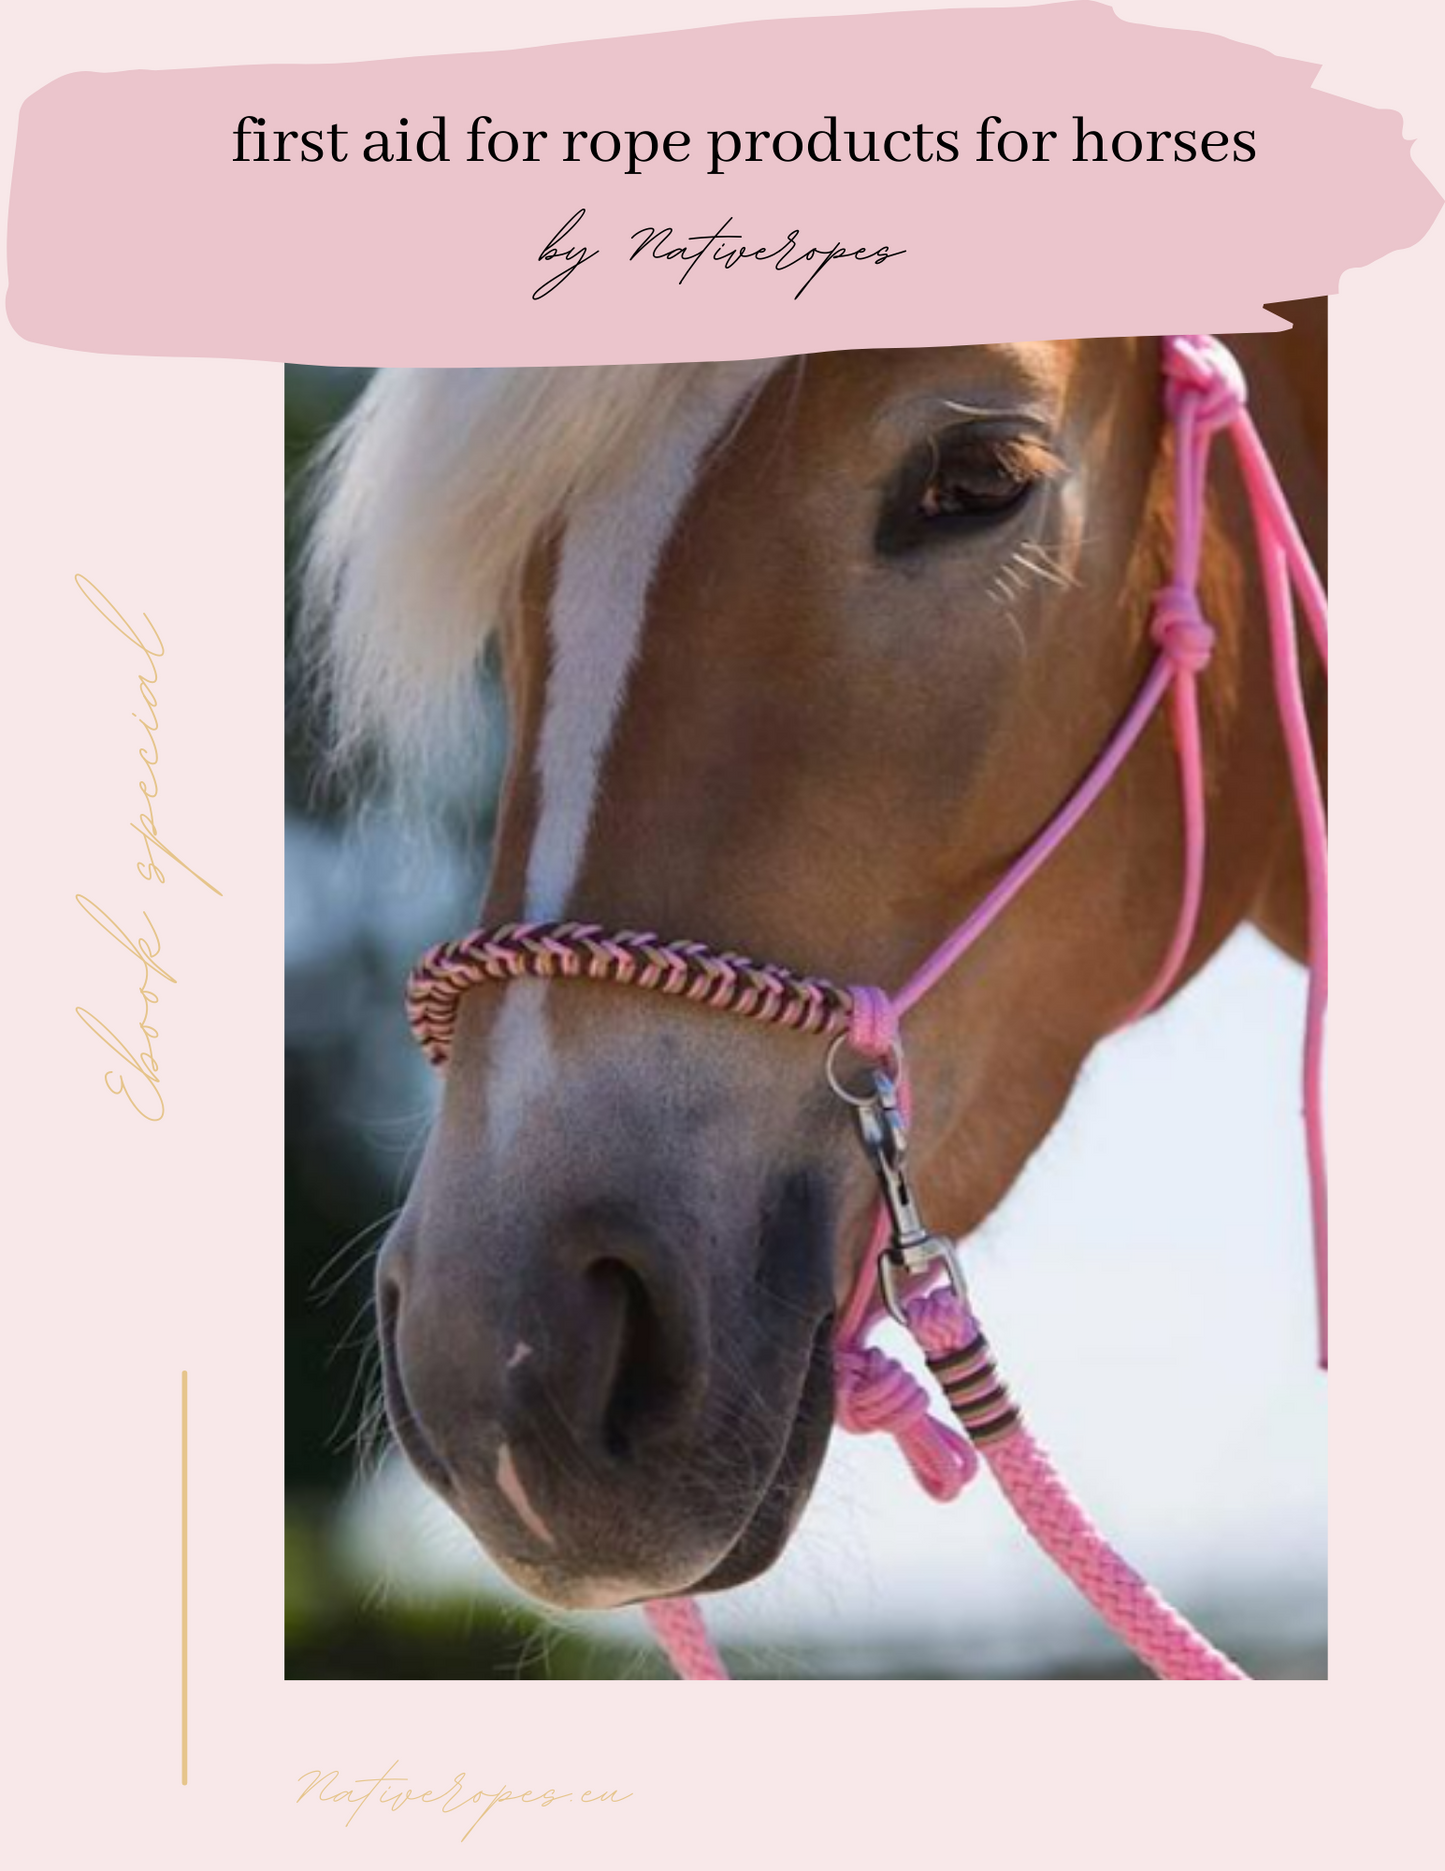 E-book: first aid for rope products for horses